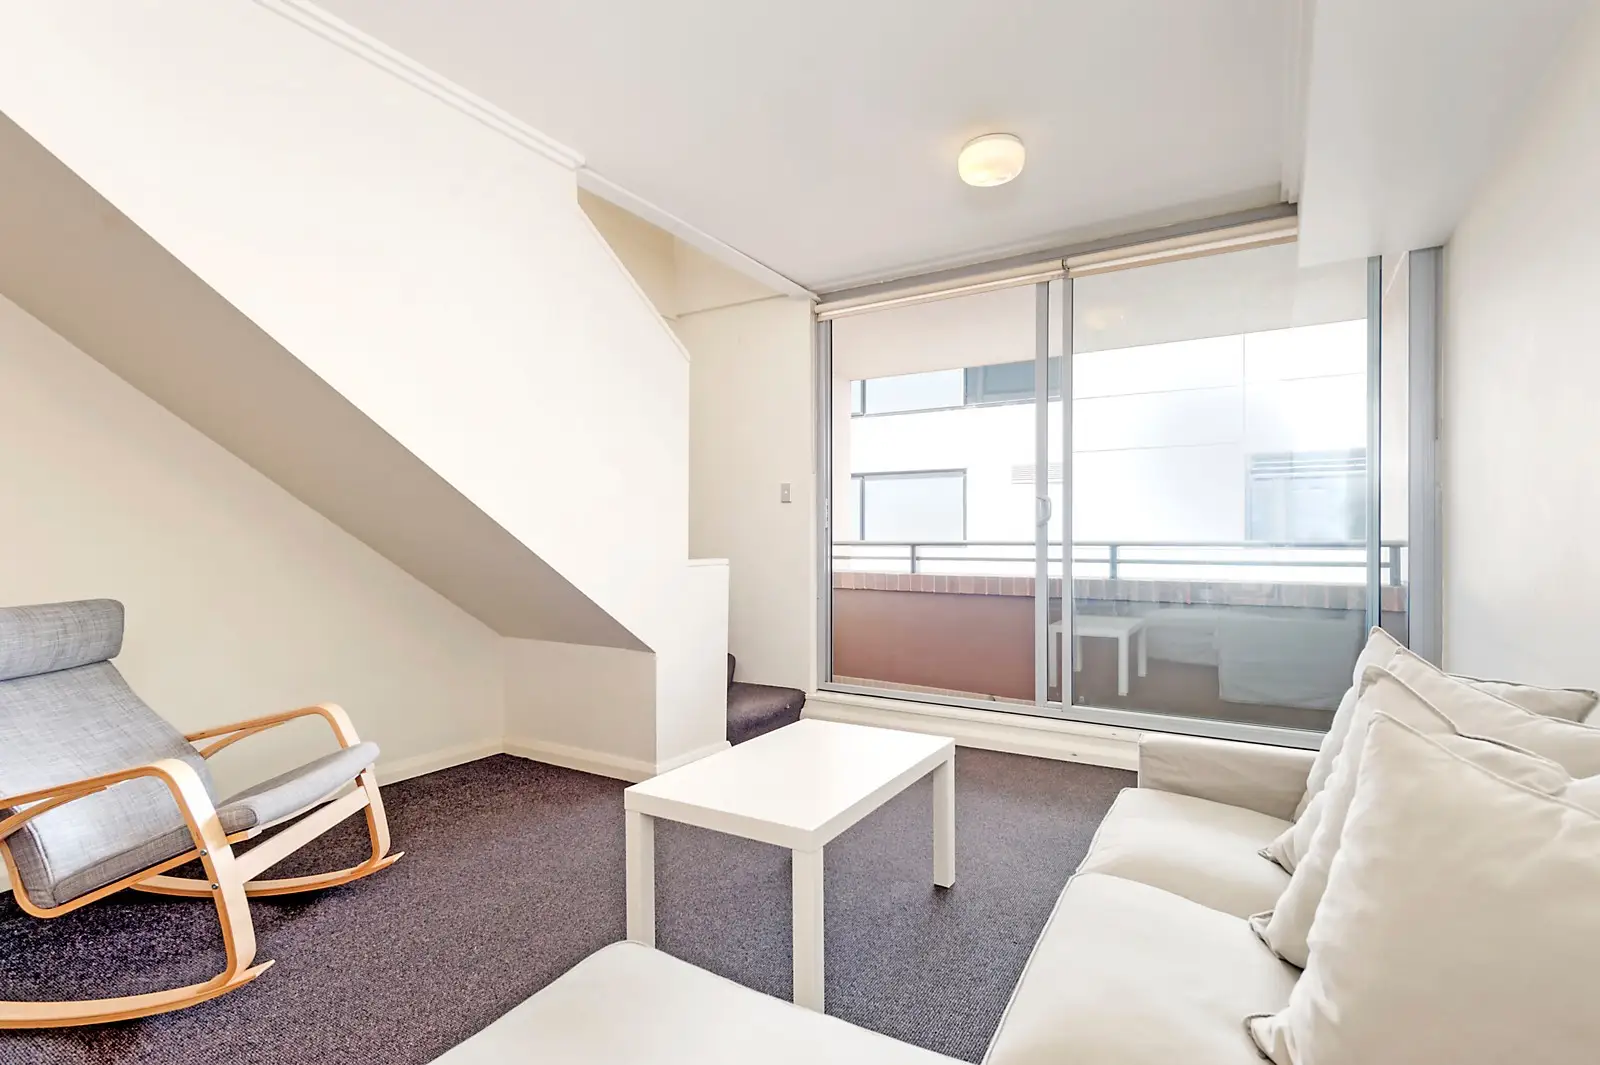 Photo #1: 219/16-20 Smail Street, Ultimo - Sold by Sydney Sotheby's International Realty